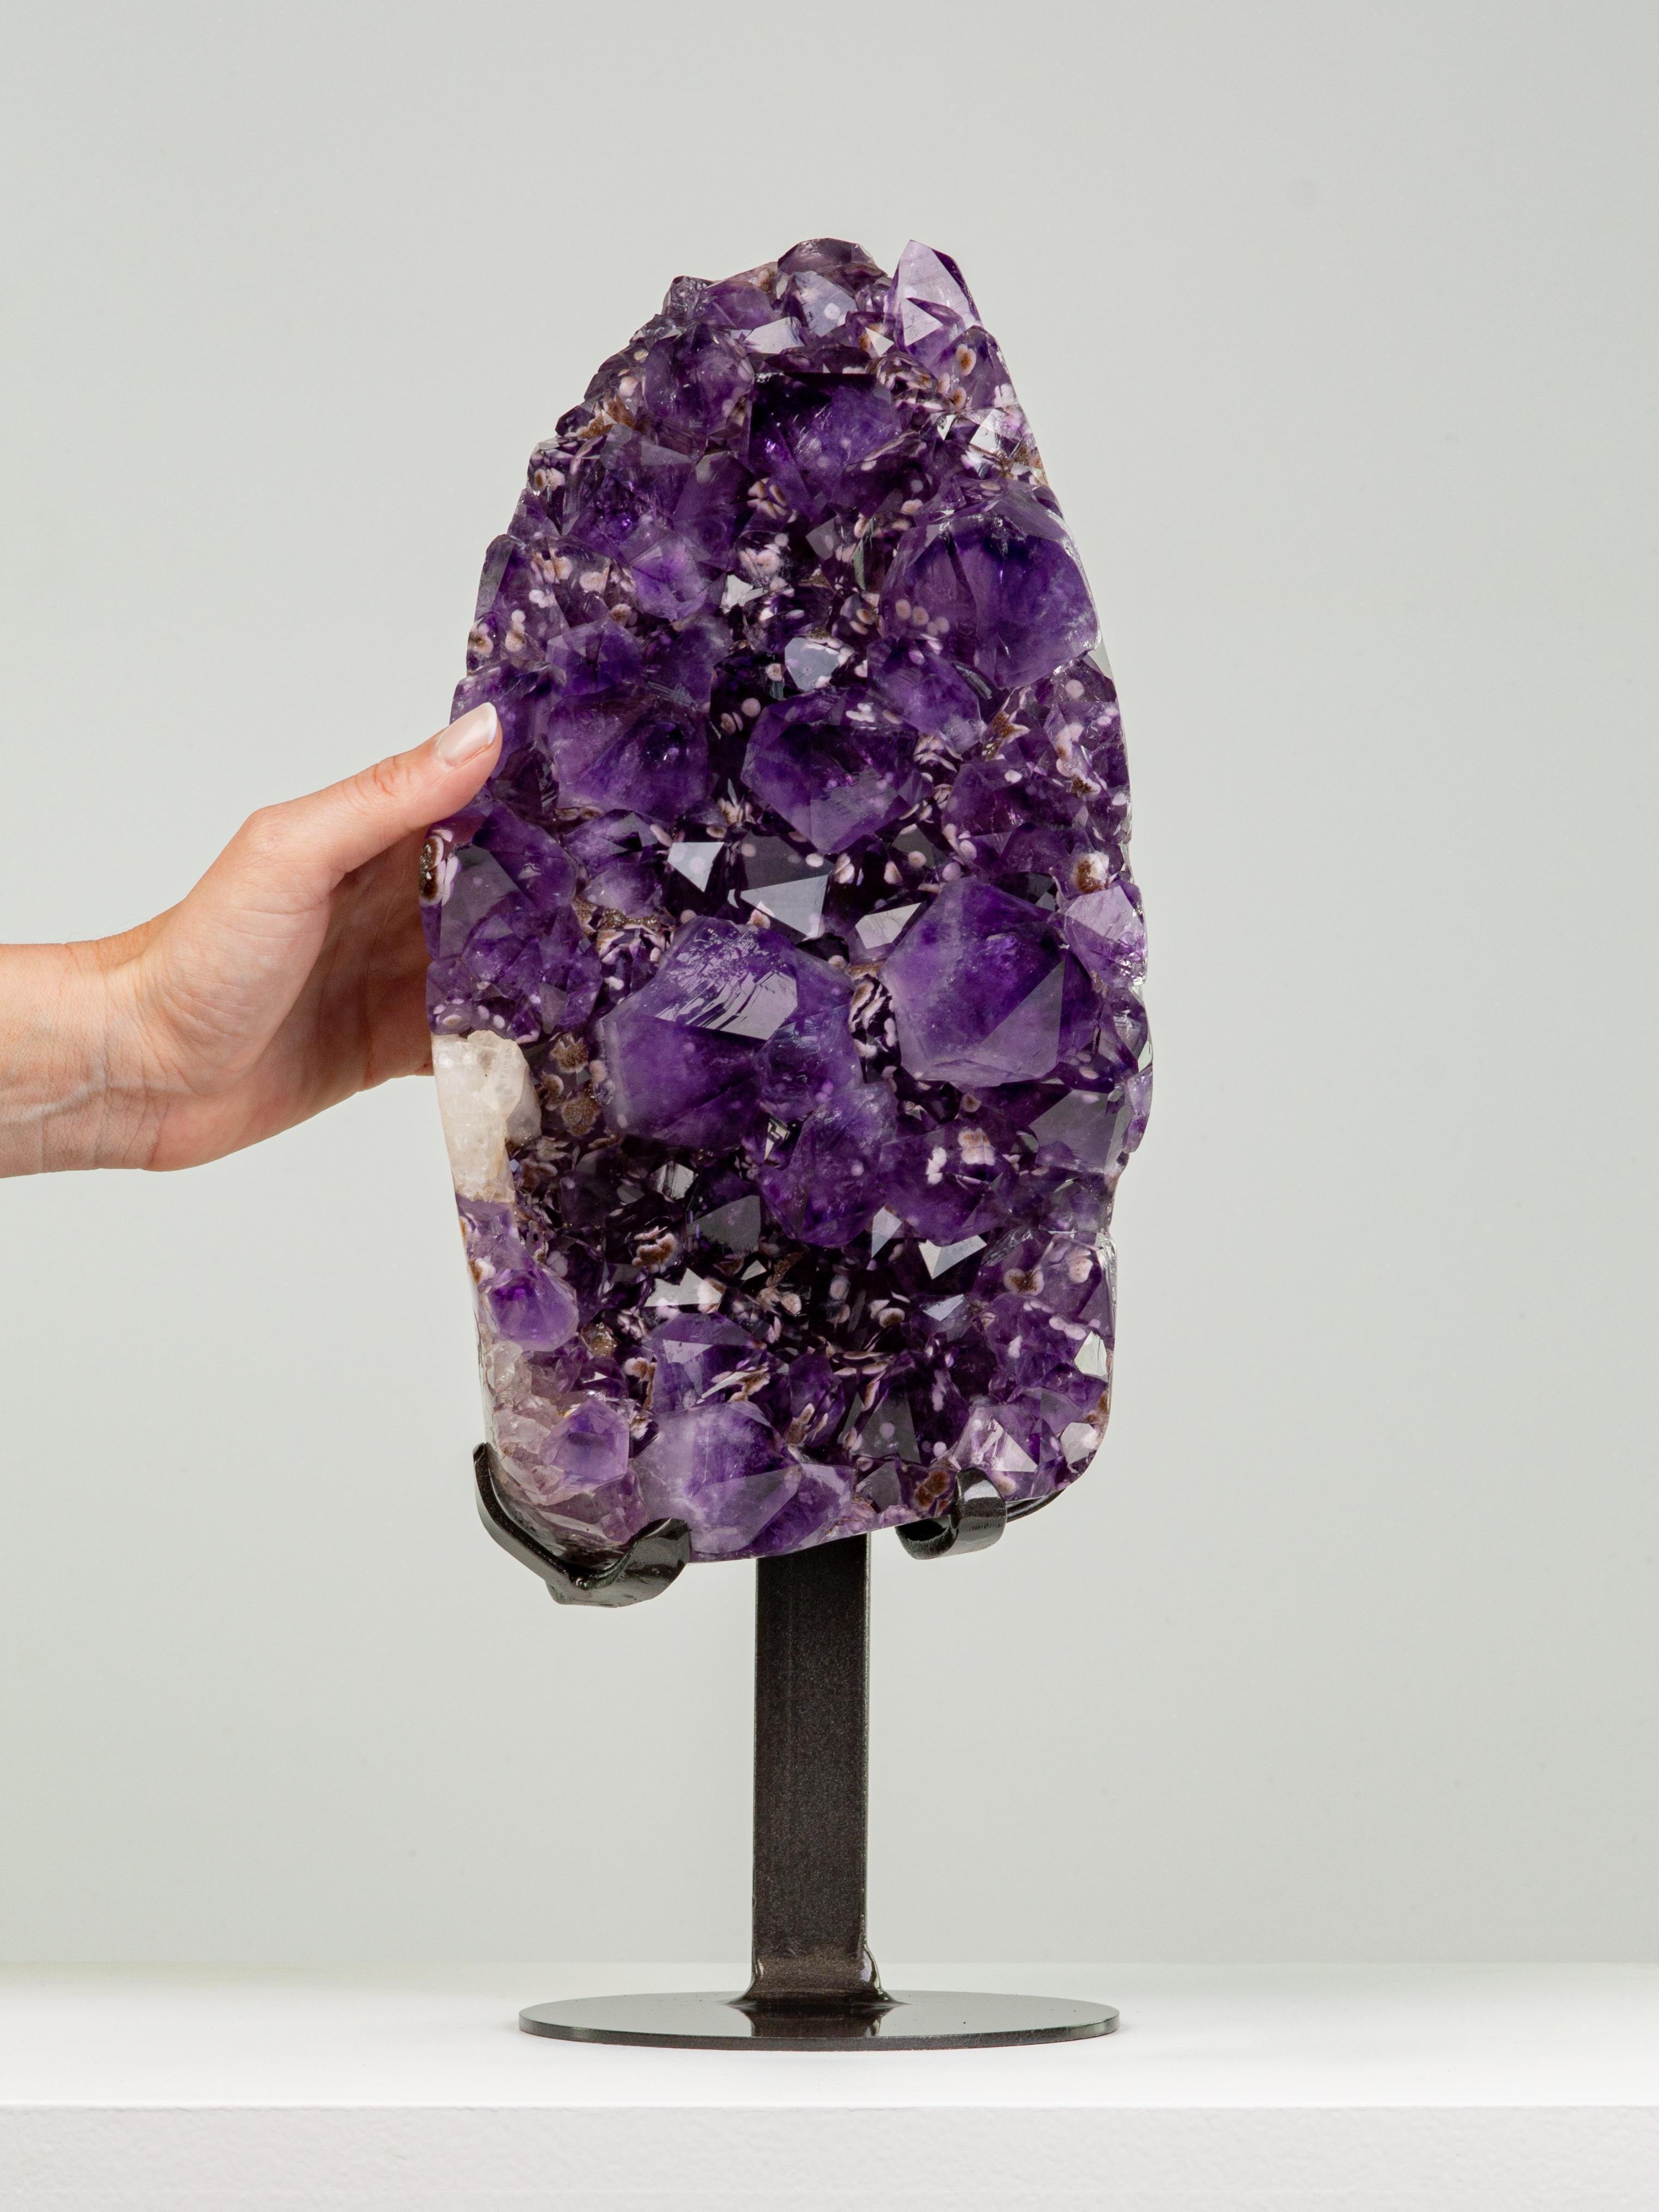 An unusual piece of high quality deep purple amethyst with large peaked
crystals. Inside the amethyst multiple goethite crystals resembling rosettes
can be seen. Several of the crystals are overcoated in brown druze.

This piece was legally and